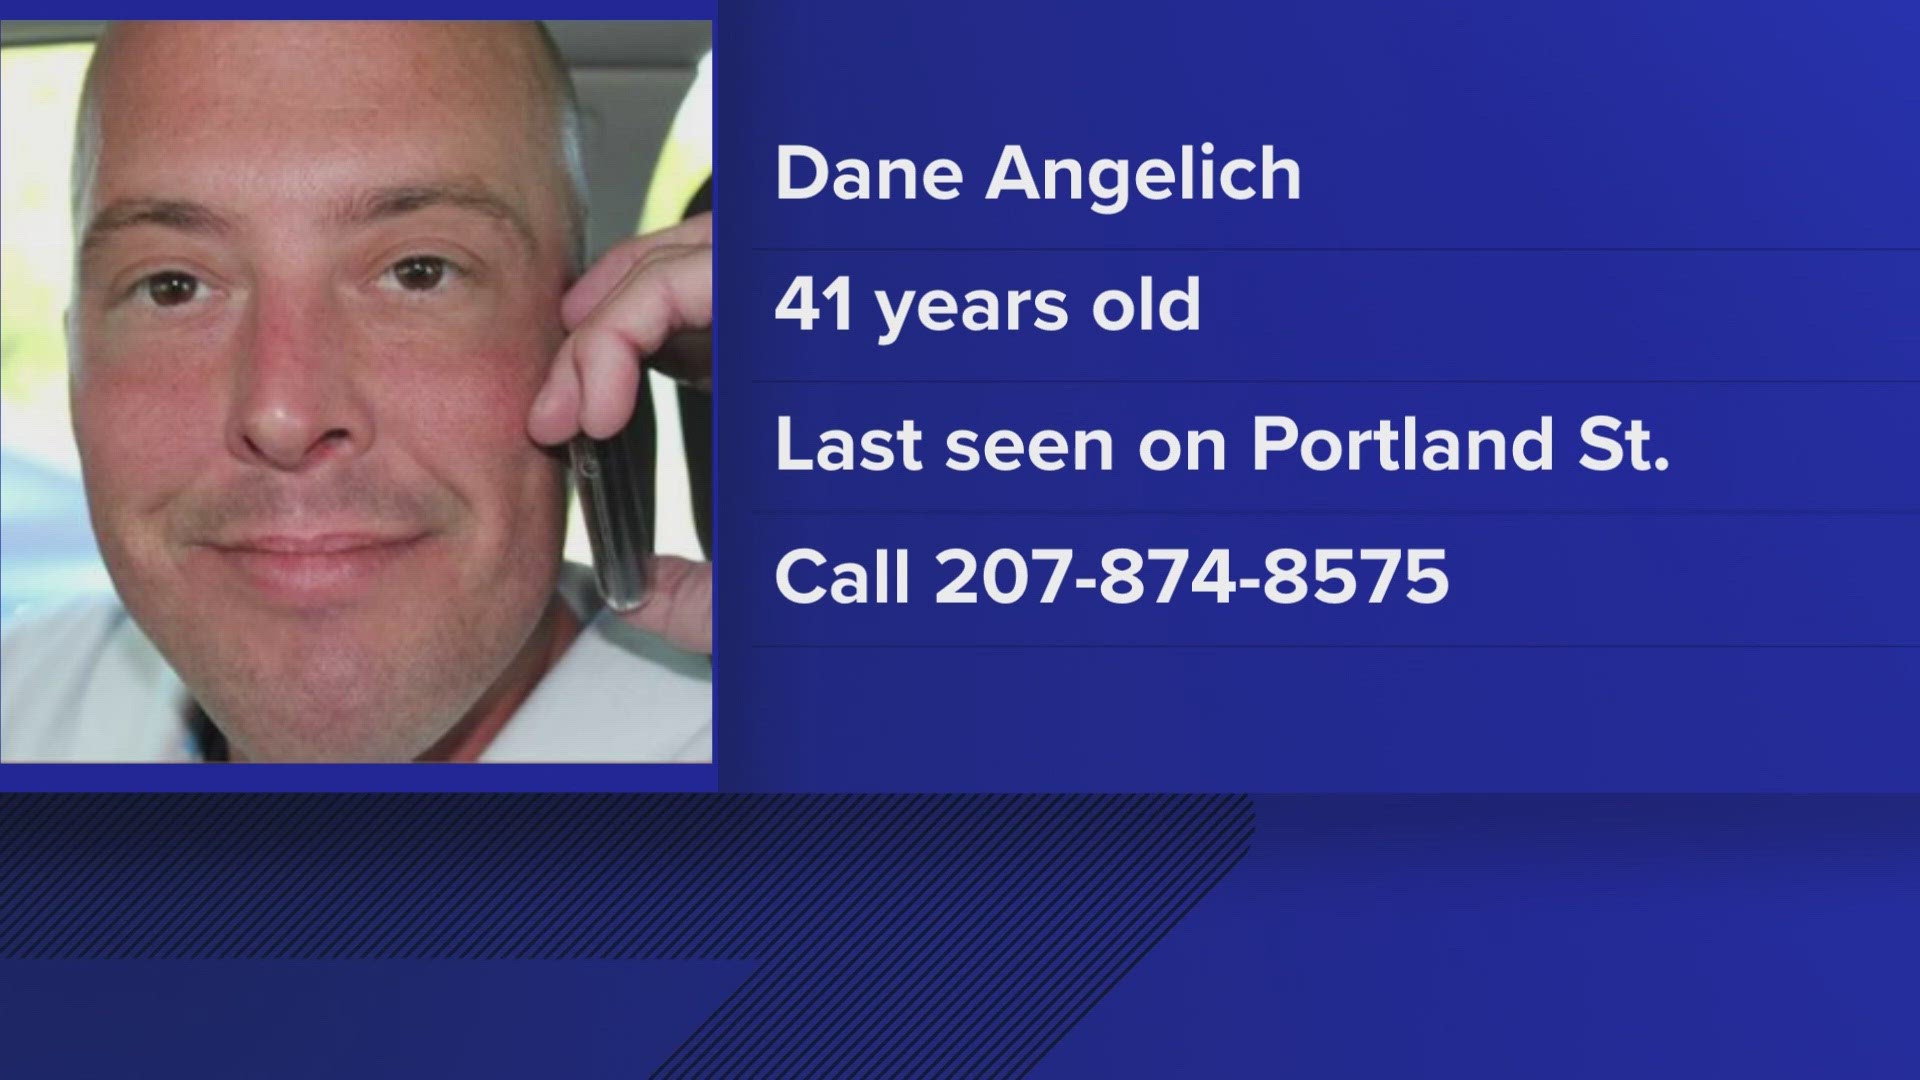 Police said he was last seen in Portland on Oct. 7, 2013.